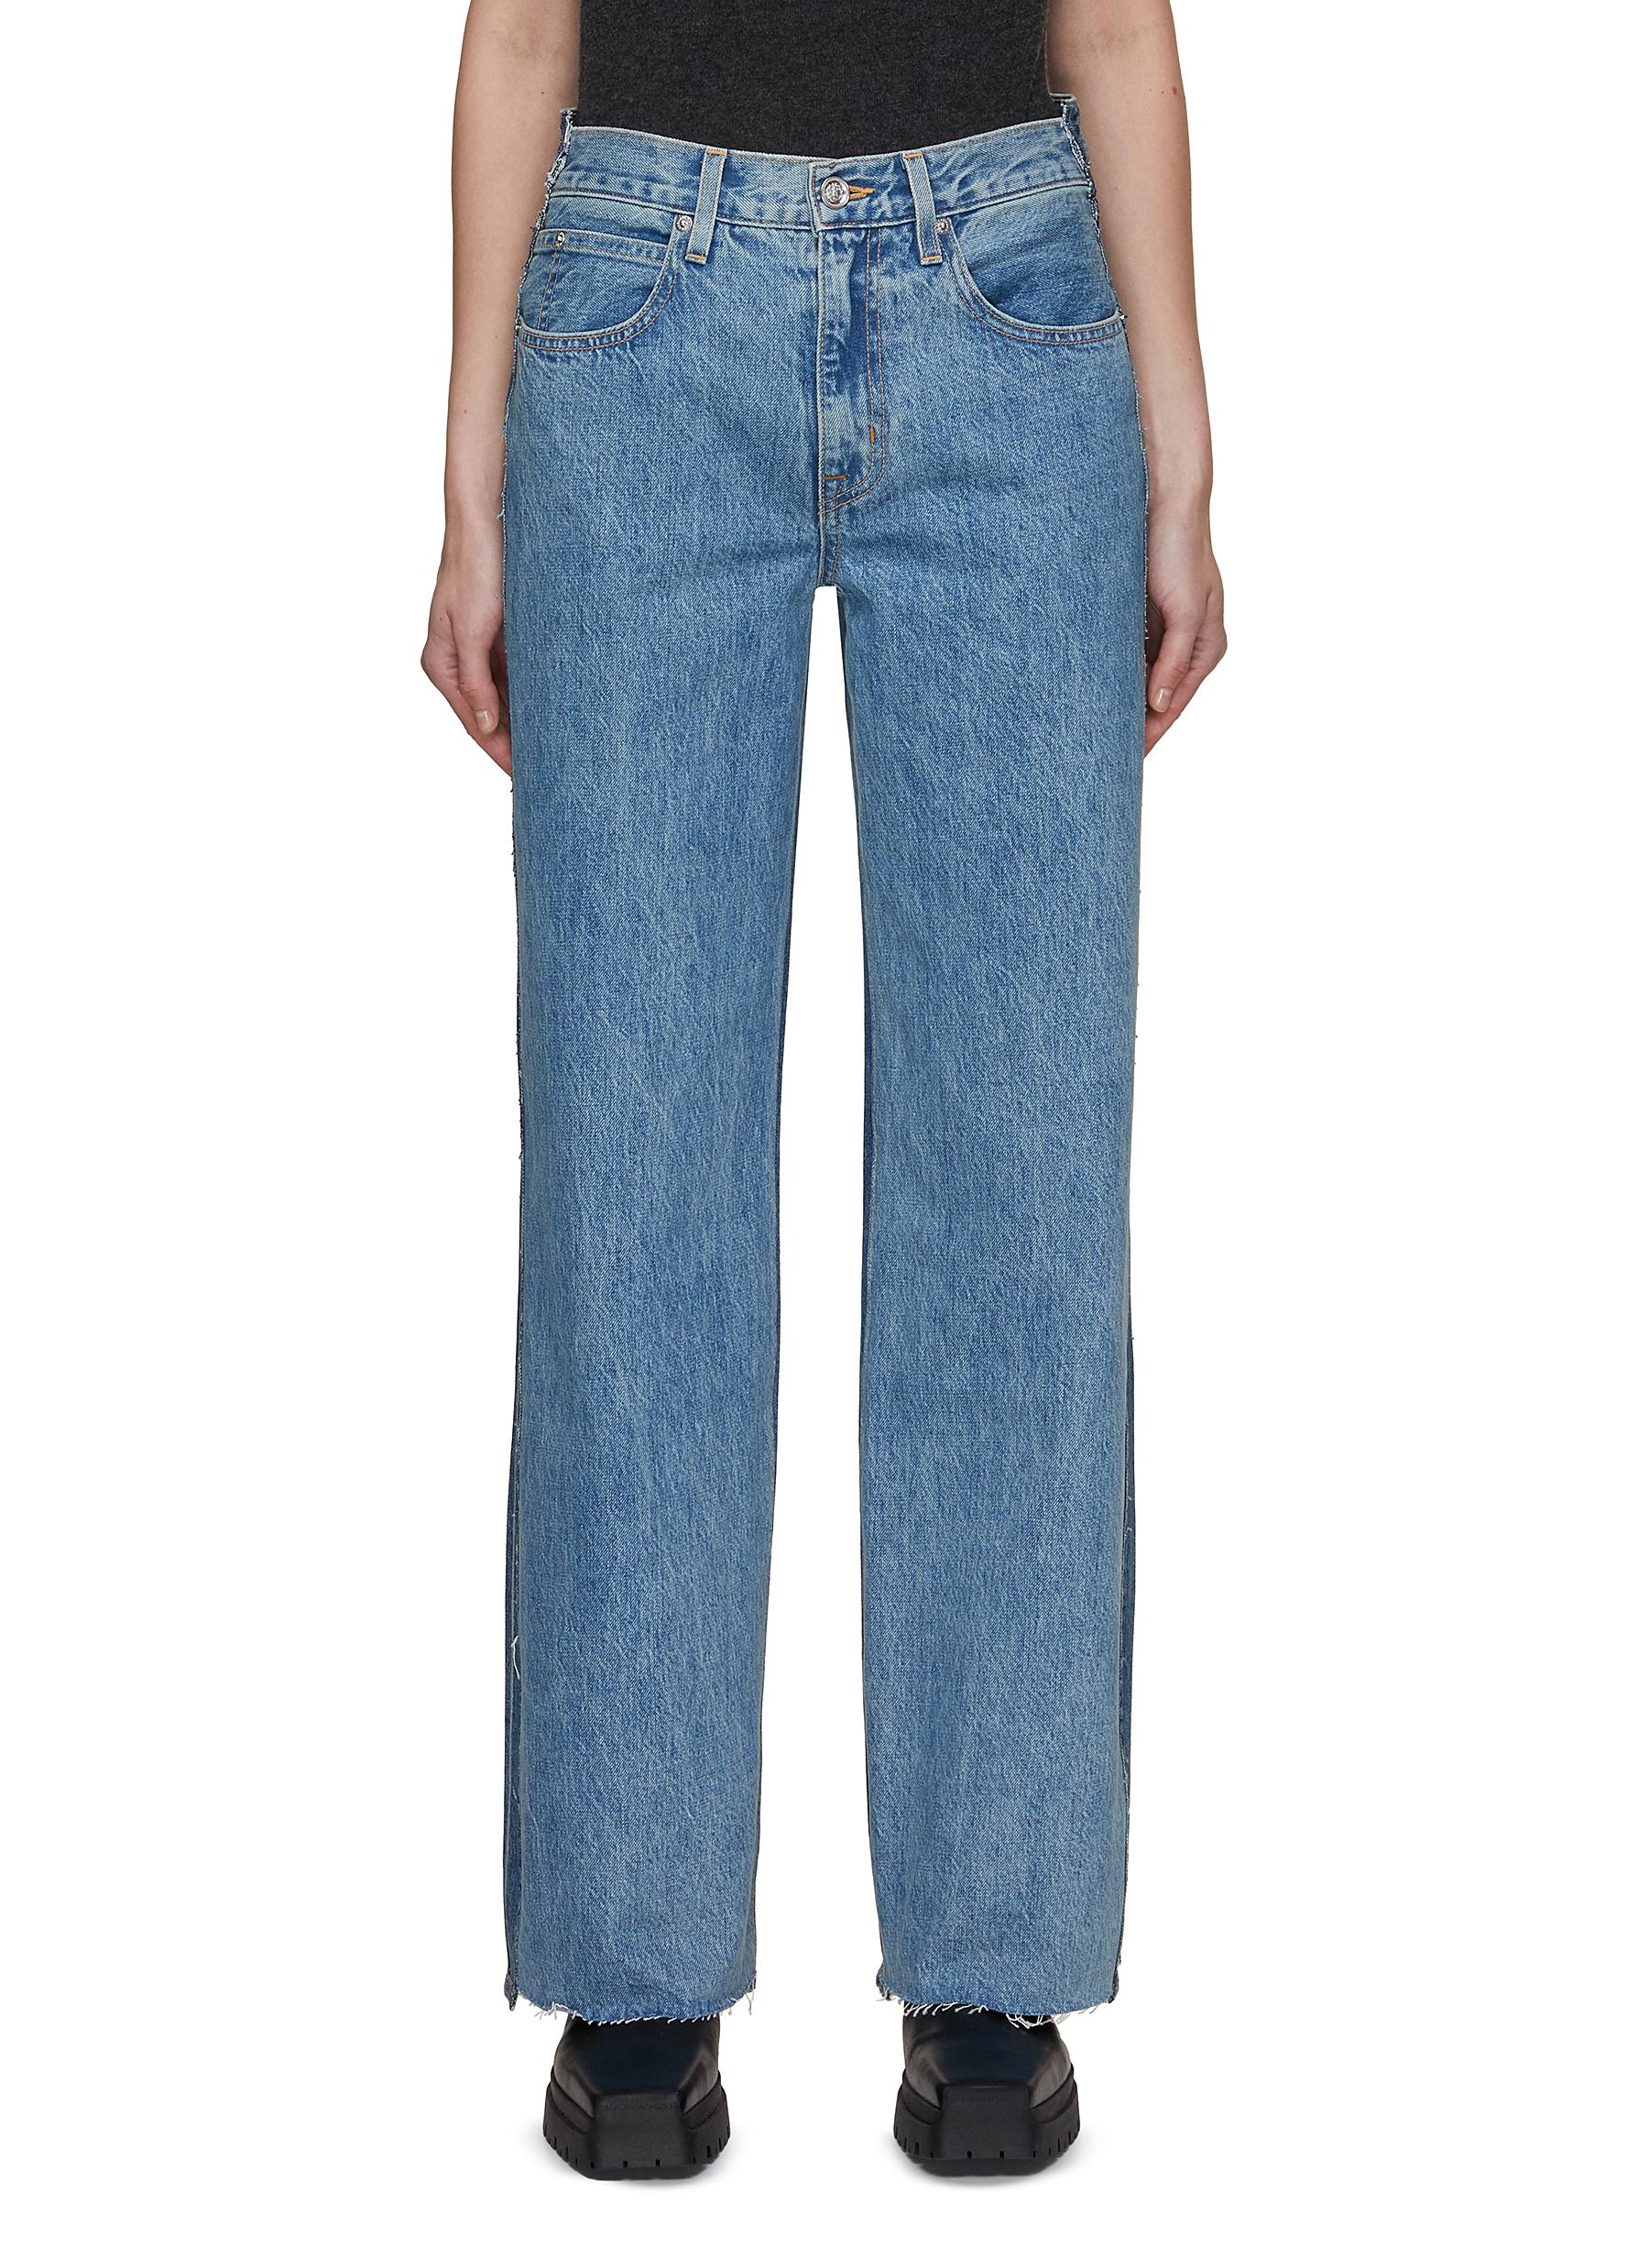 Grace 2 Tone Re-Worked Straight Leg Jeans